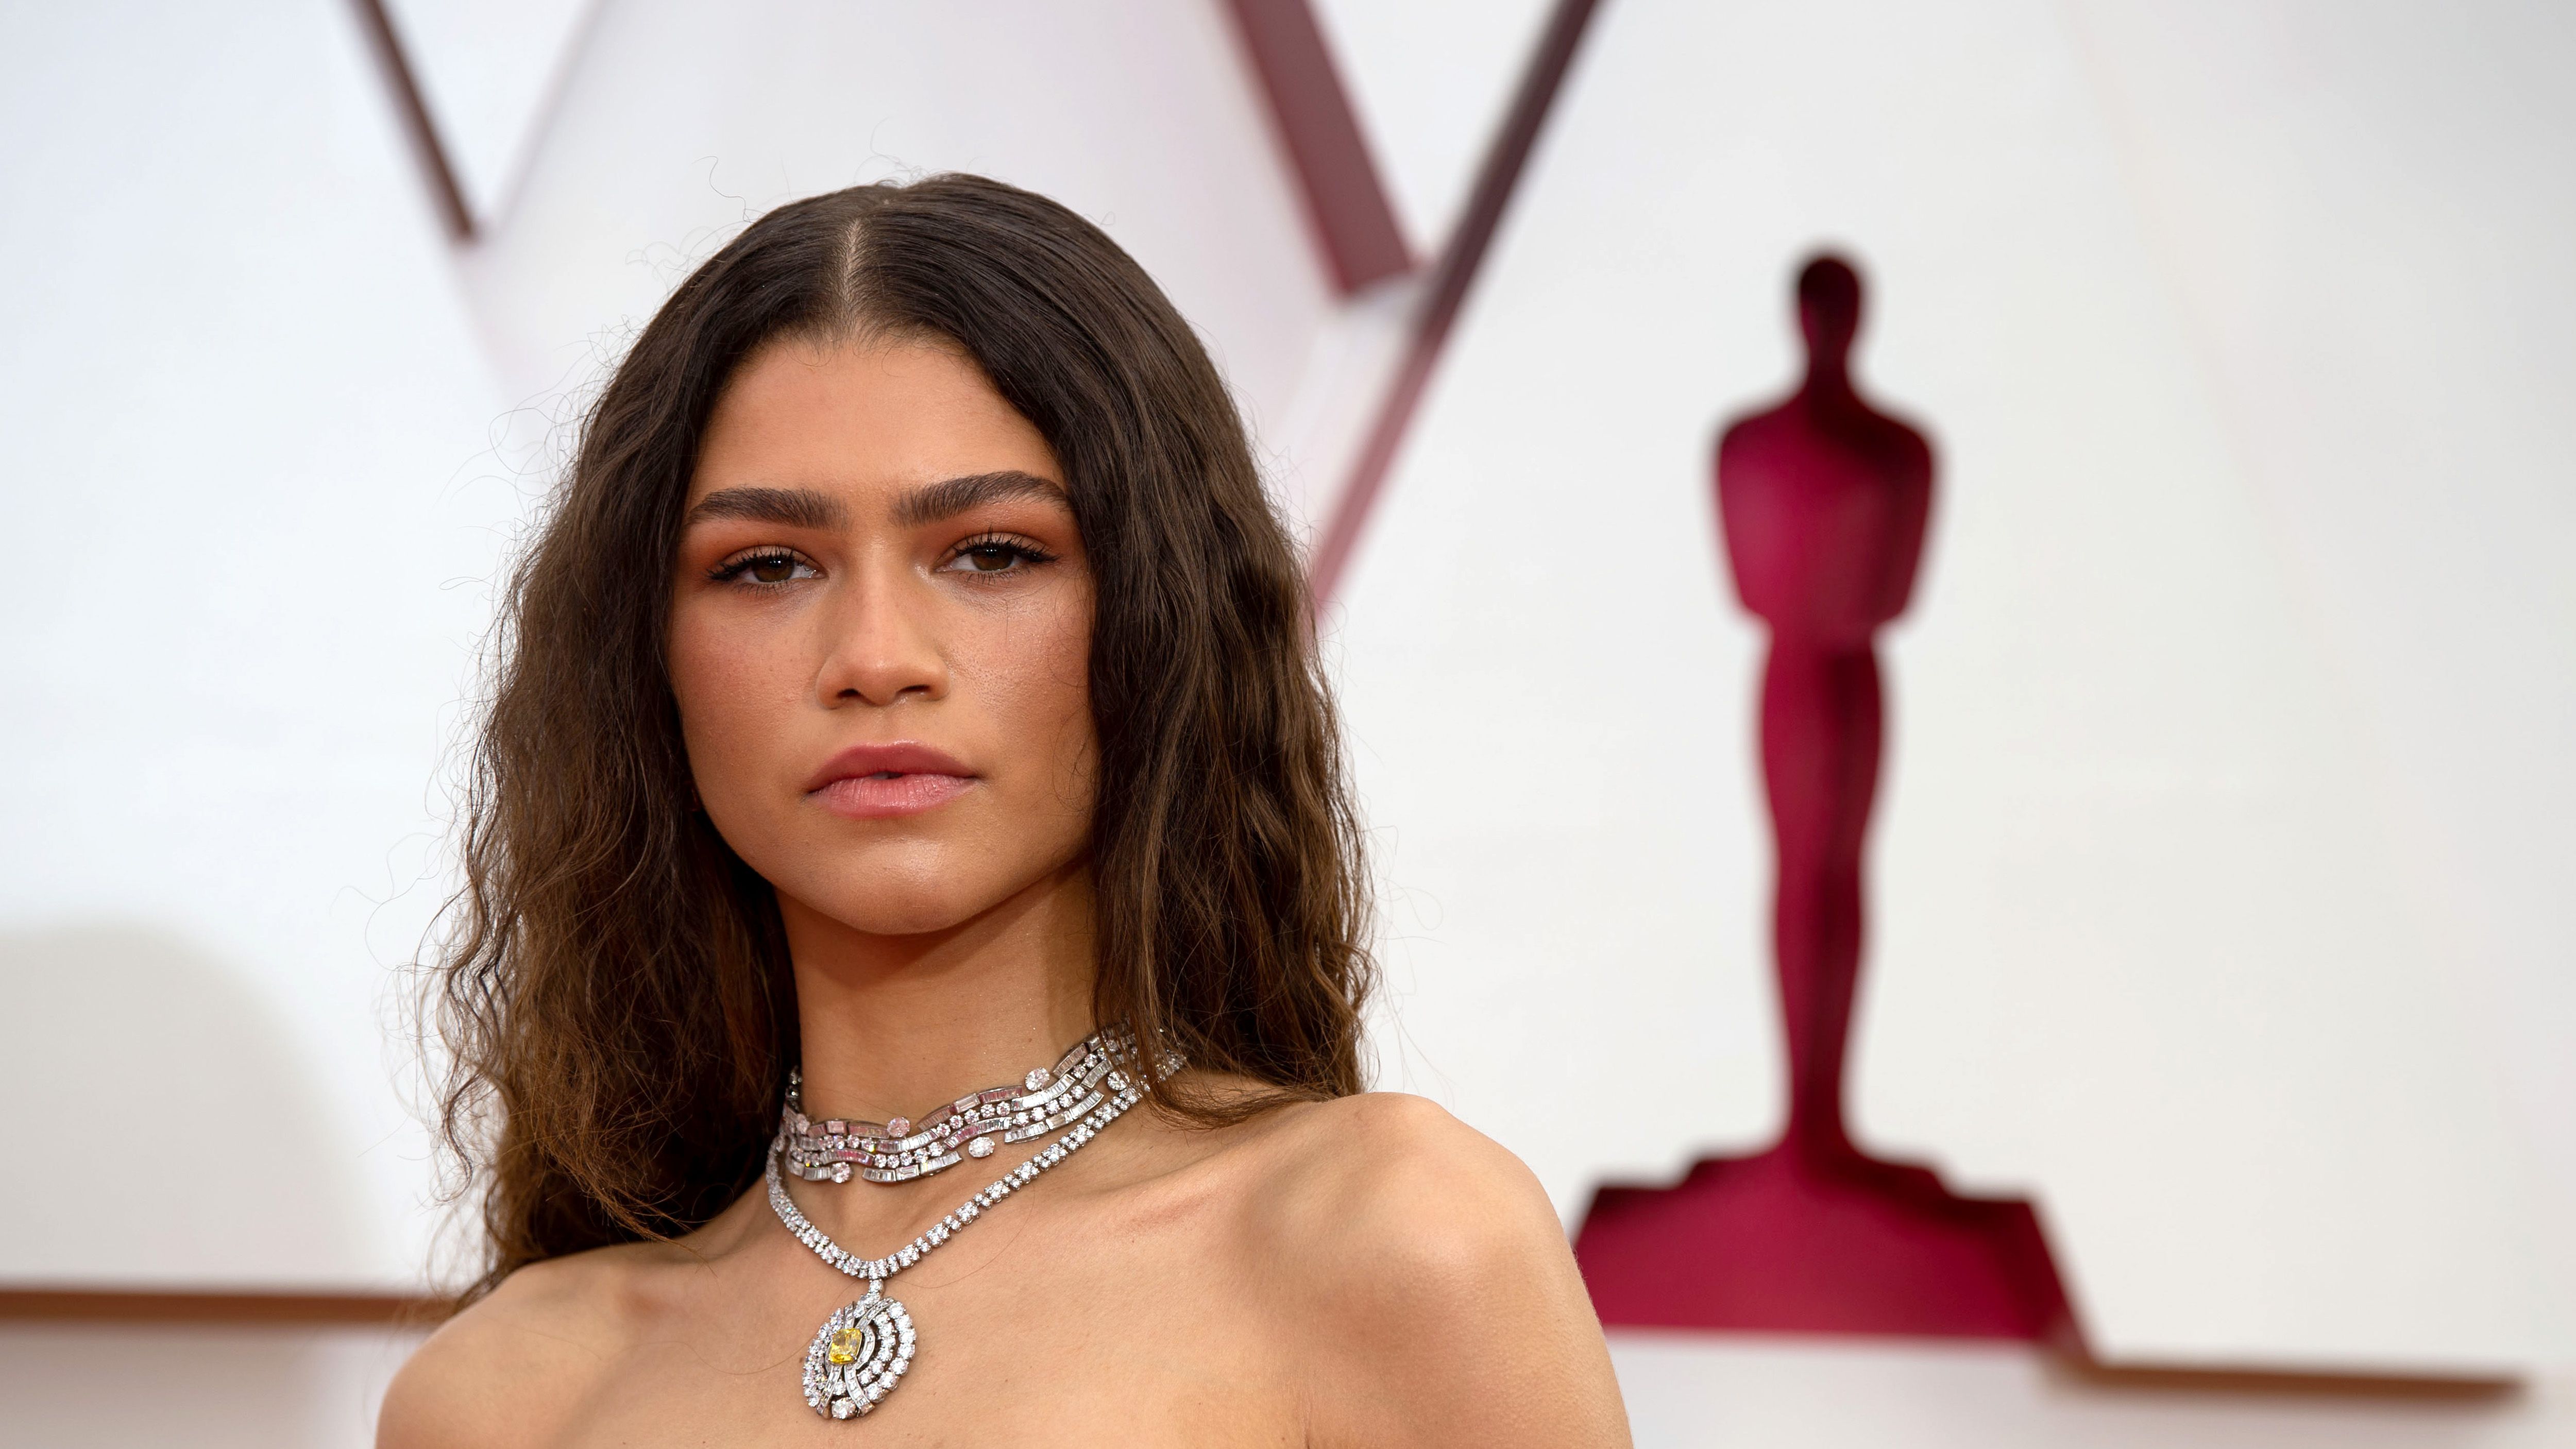 Zendaya is the newest Louis Vuitton Ambassador and face of the Capucines Bag